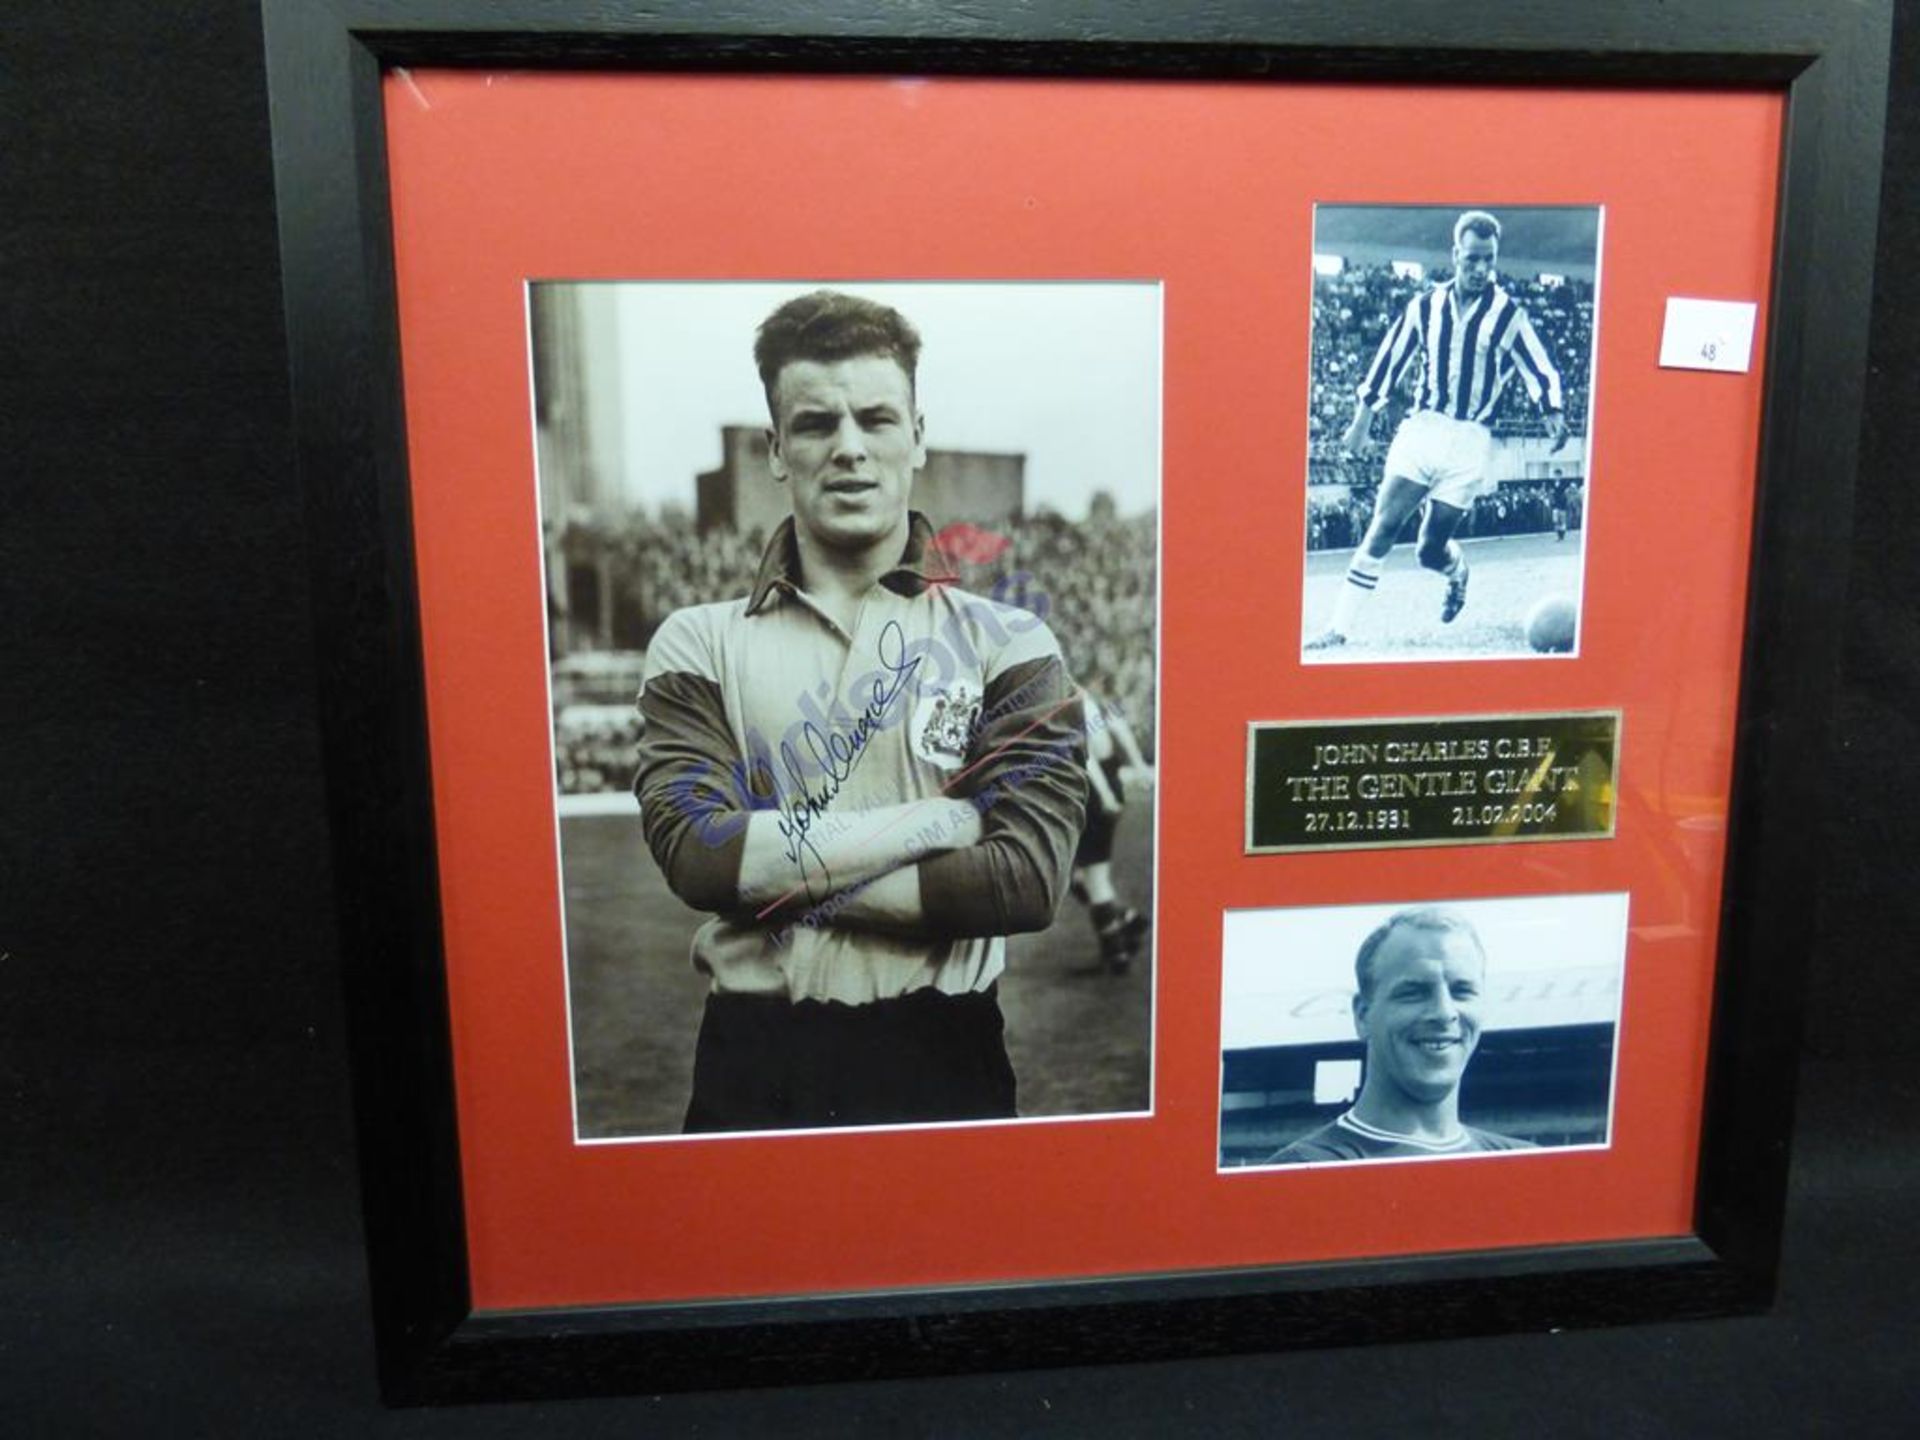 Sports Autographs: "The Gentle Giant" - John Charles